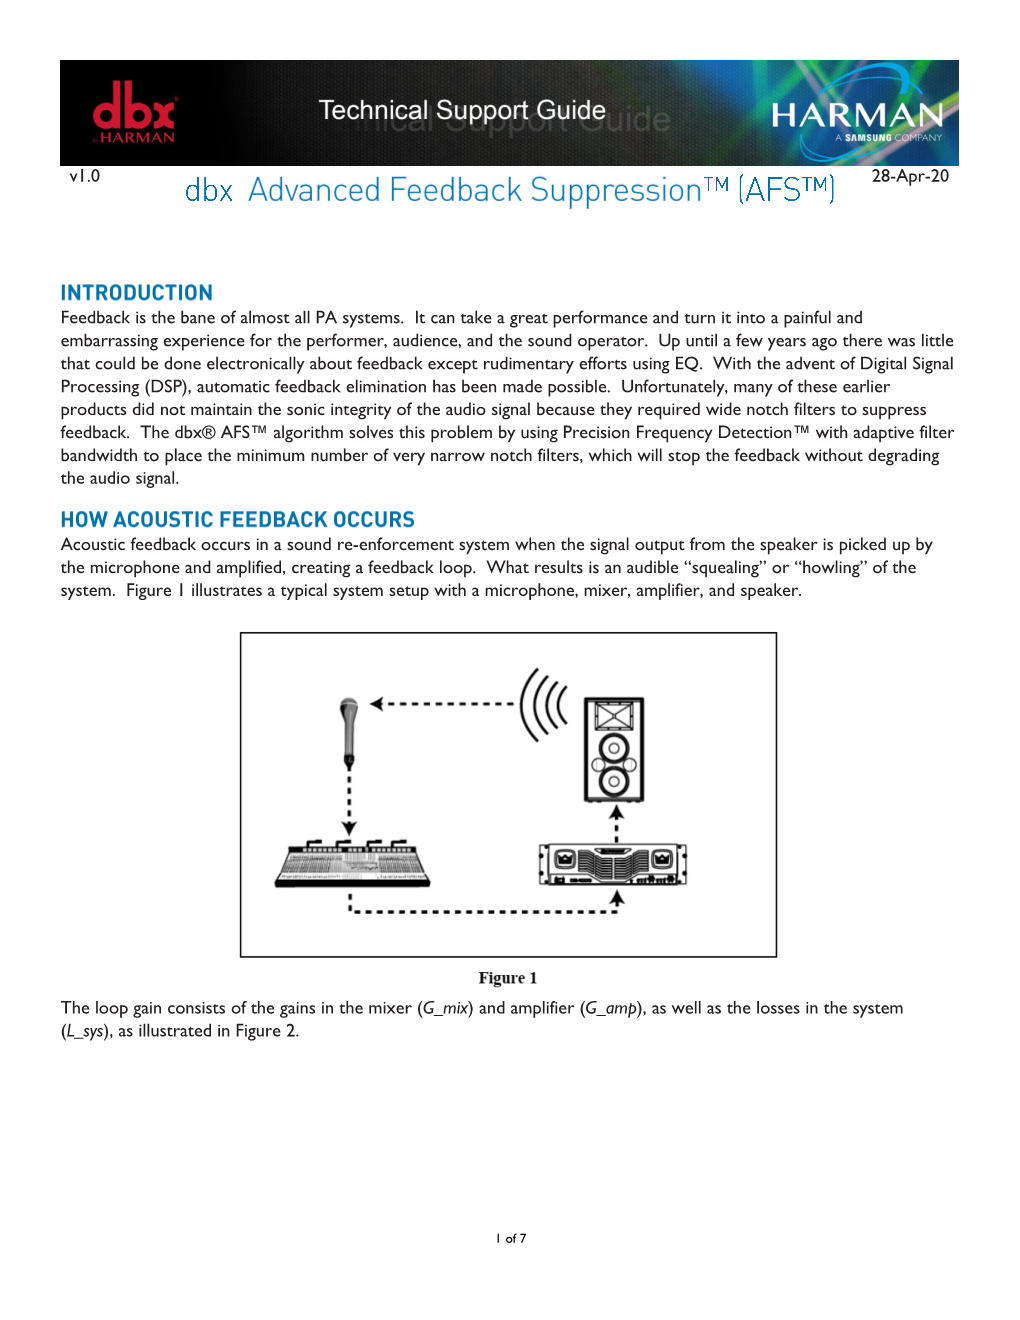 Dbx Advanced Feedback Suppression™ (AFS™) Algorithm Eliminates Feedback by Placing a Very Narrow Notch Filter at the Frequency Feeding Back